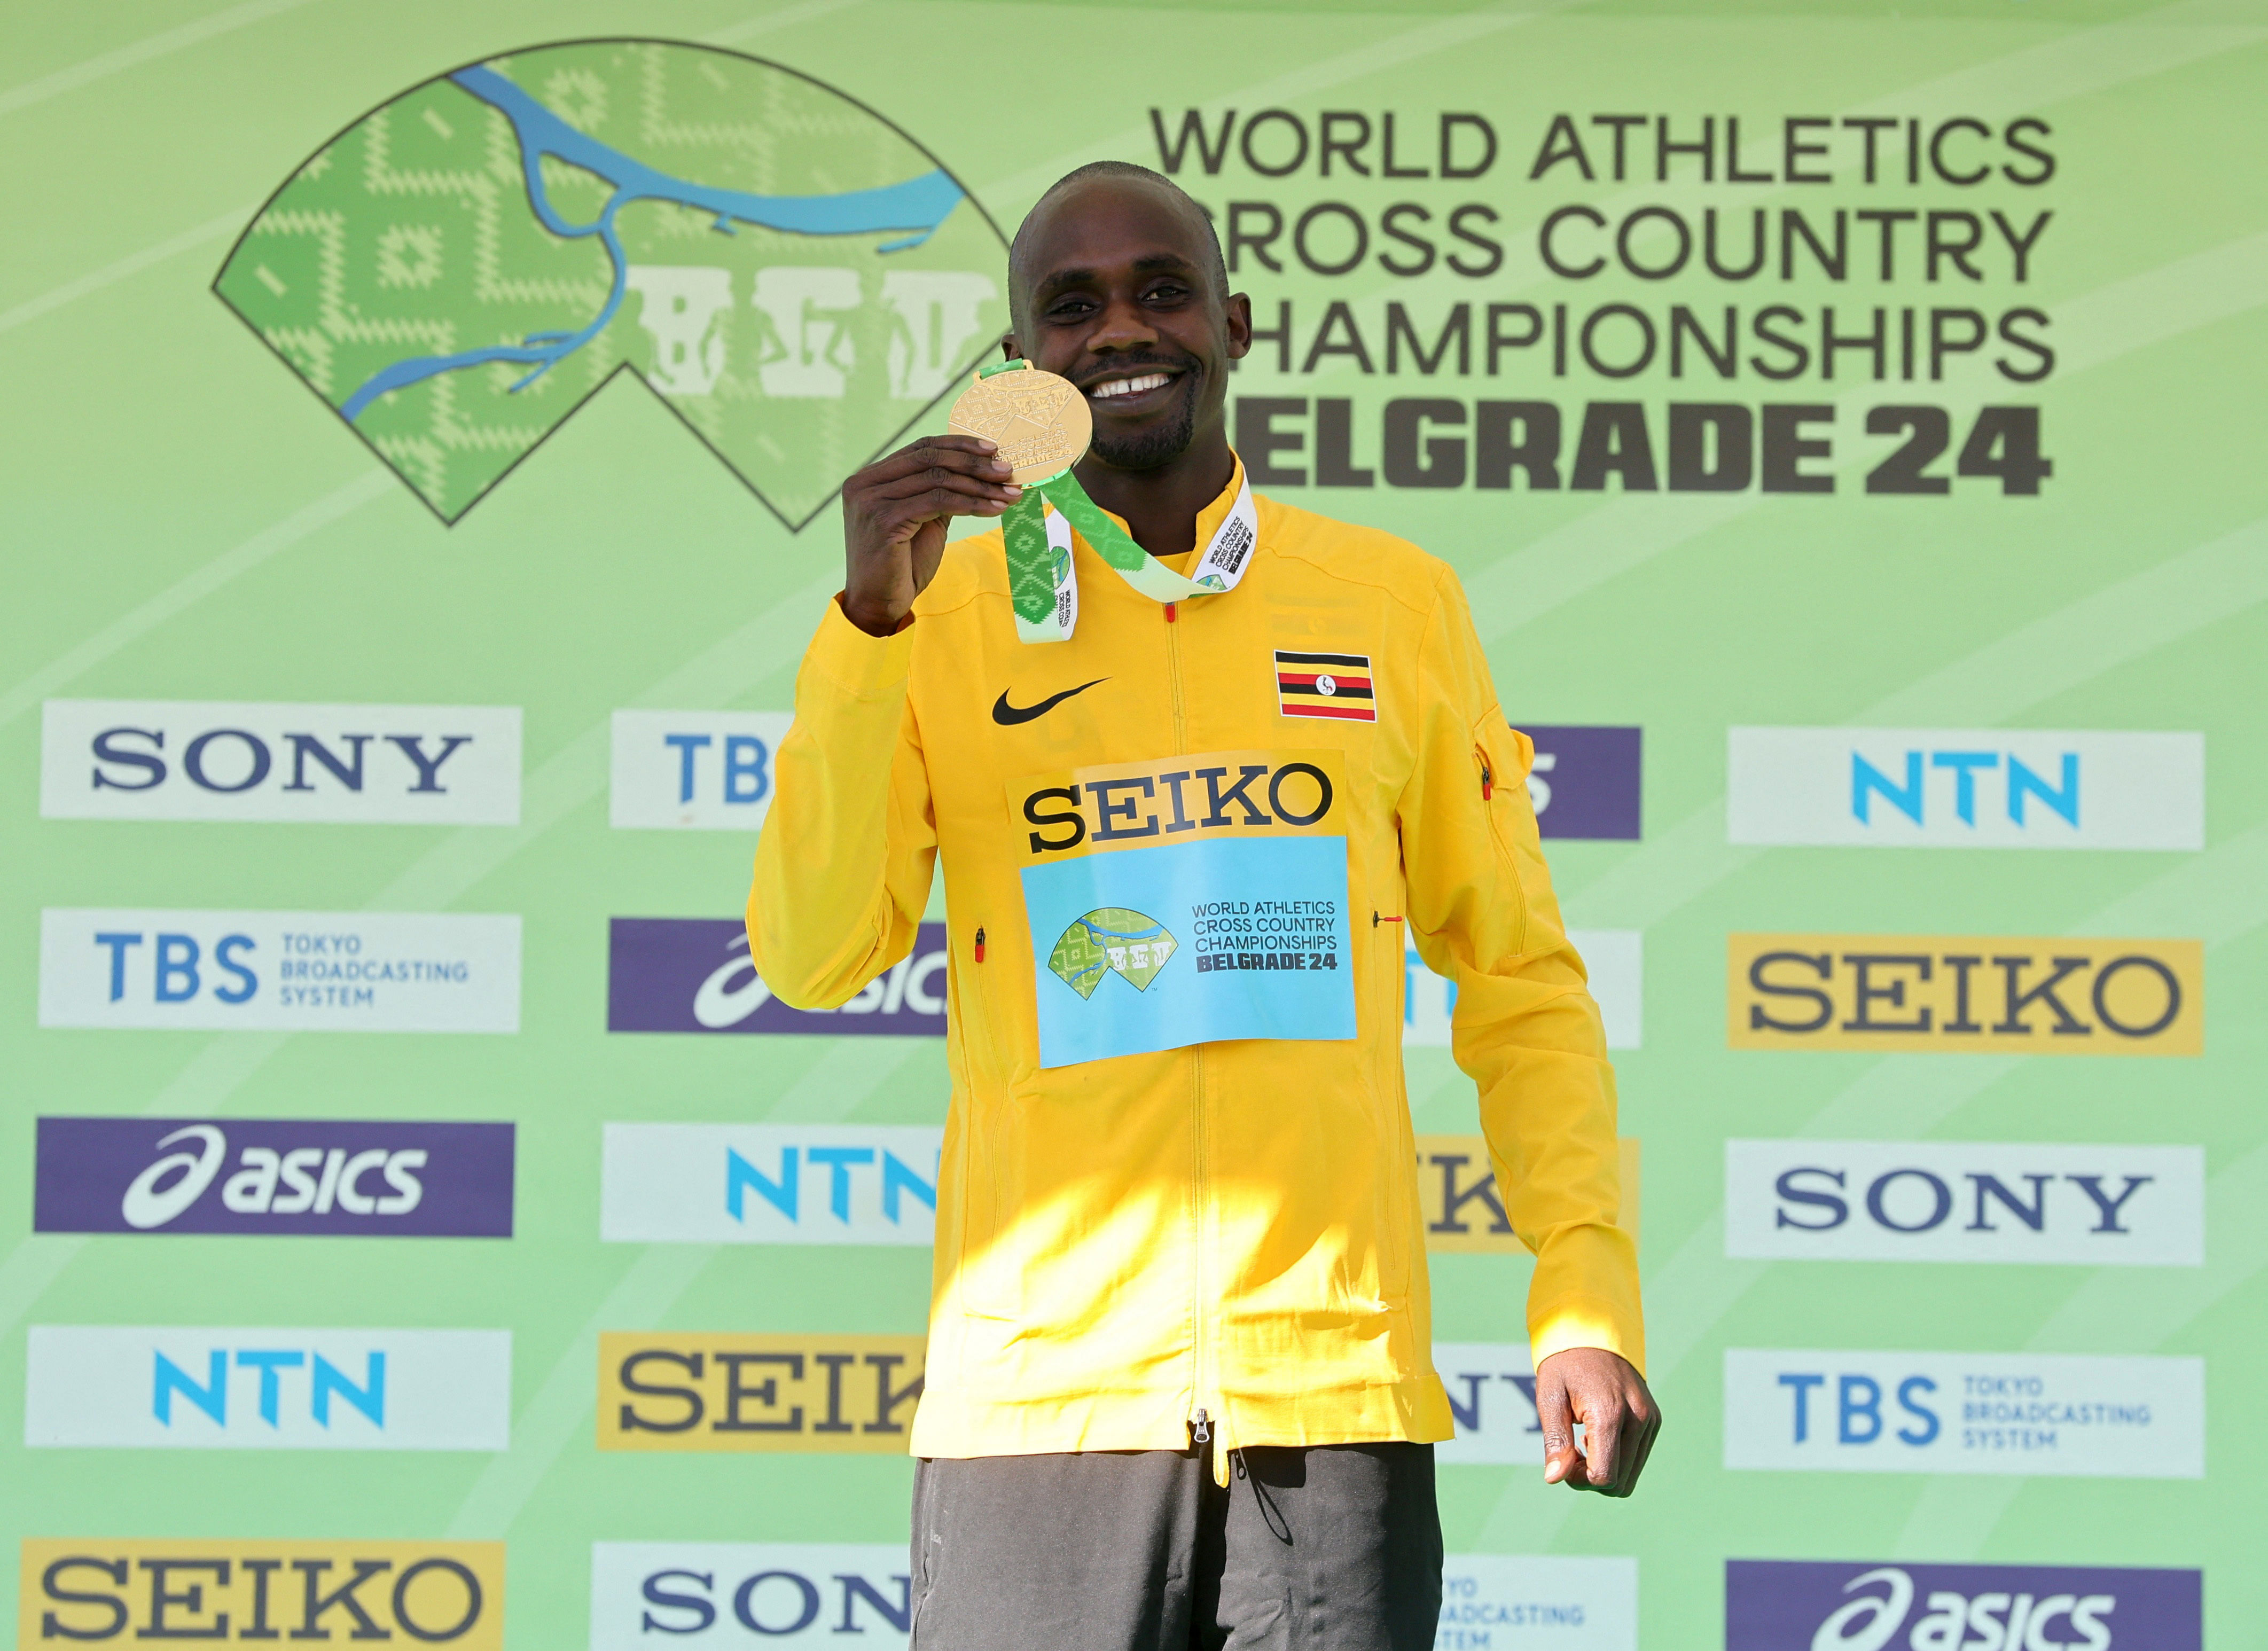 Jacob Kiplimo and Beatrice Chebet win back to back world cross country titles